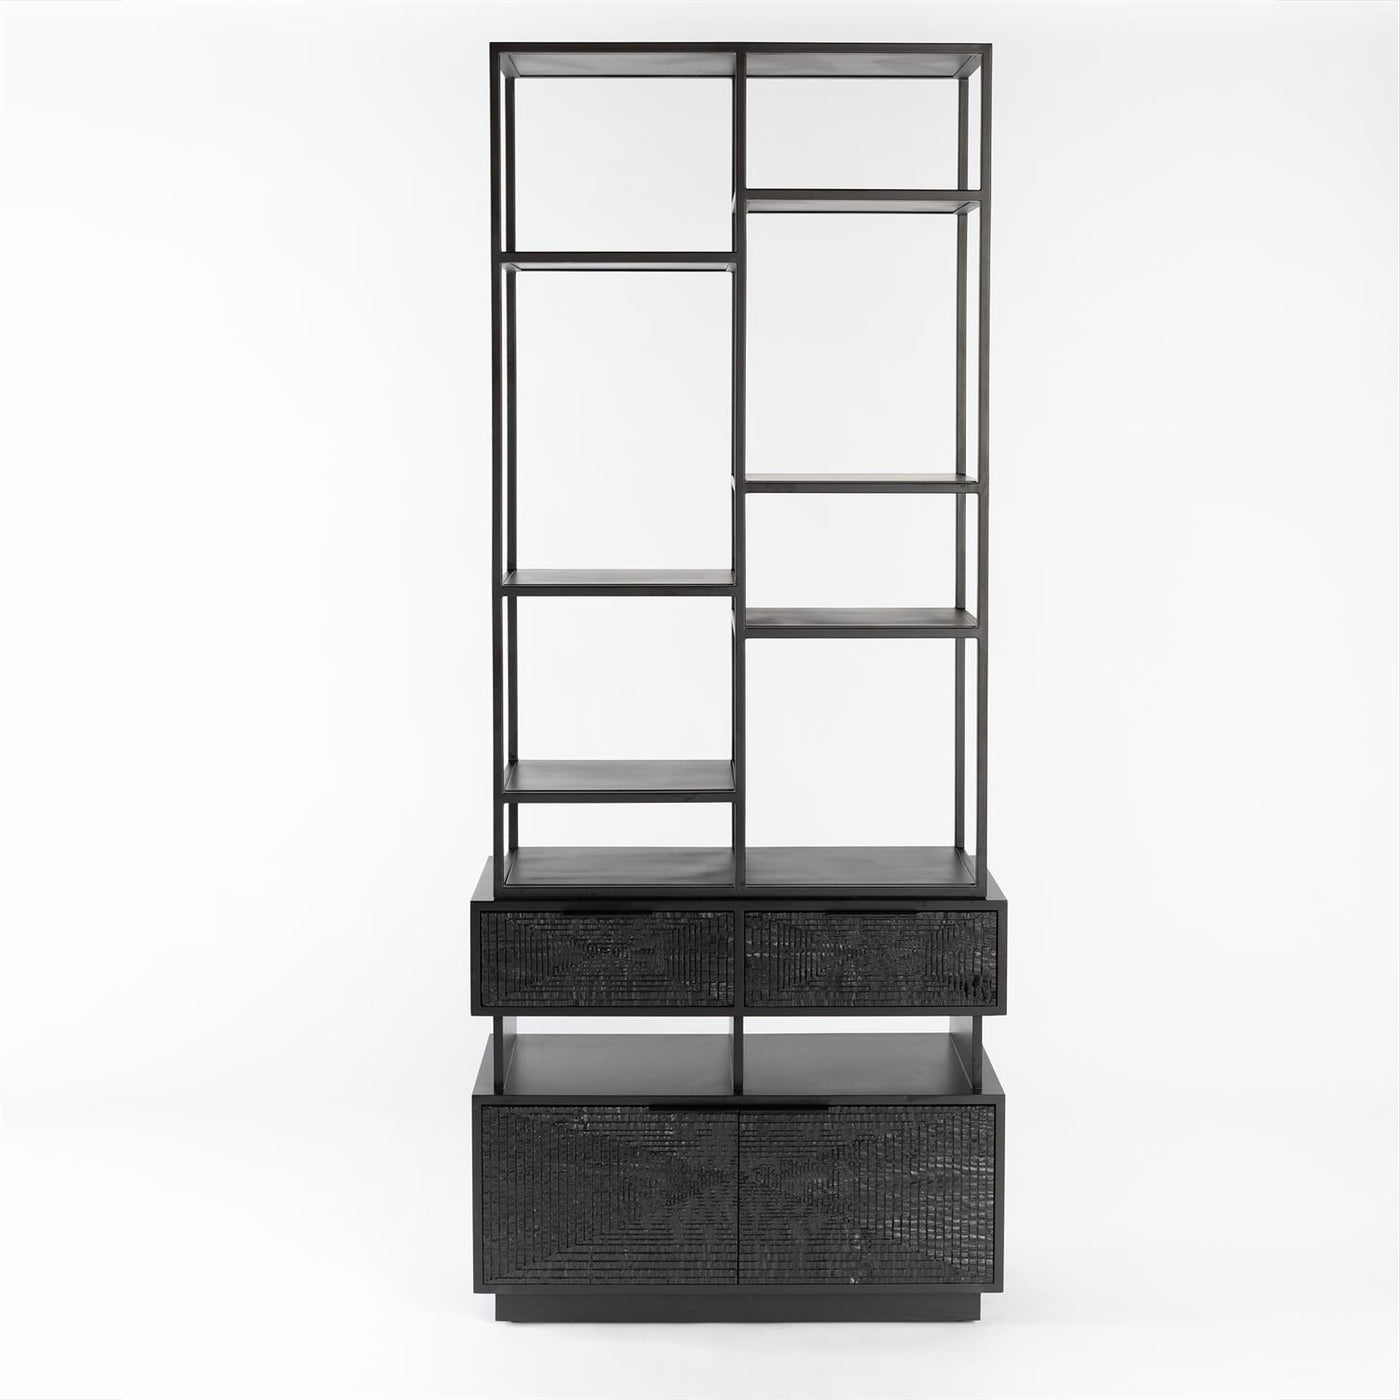 KYOTO ETAGERE by Global Views